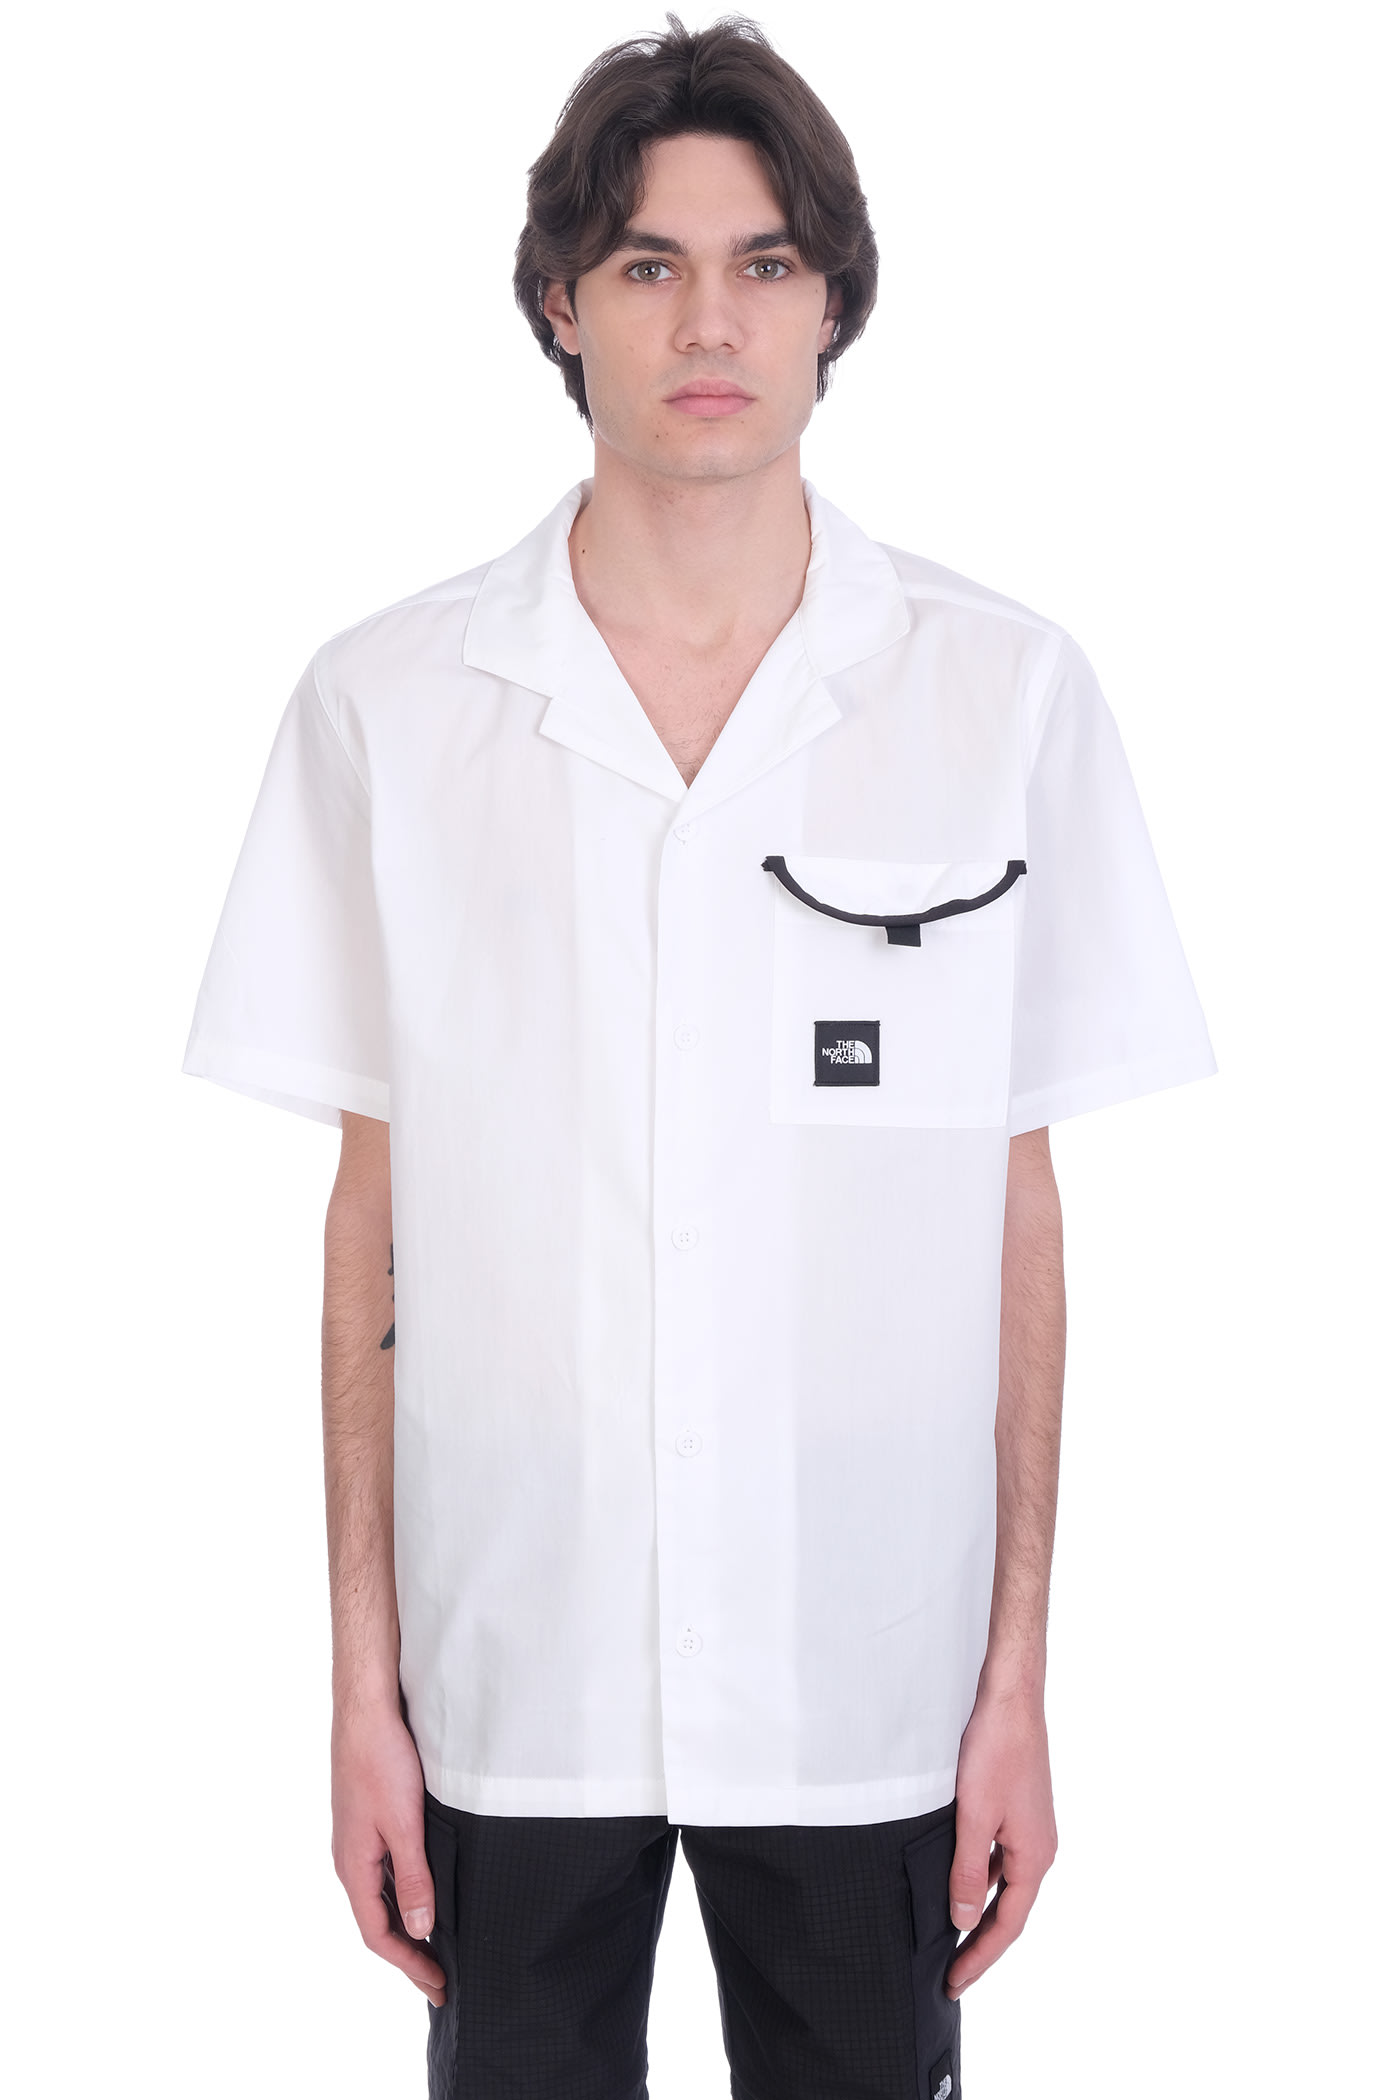 The North Face Shirt In White Cotton